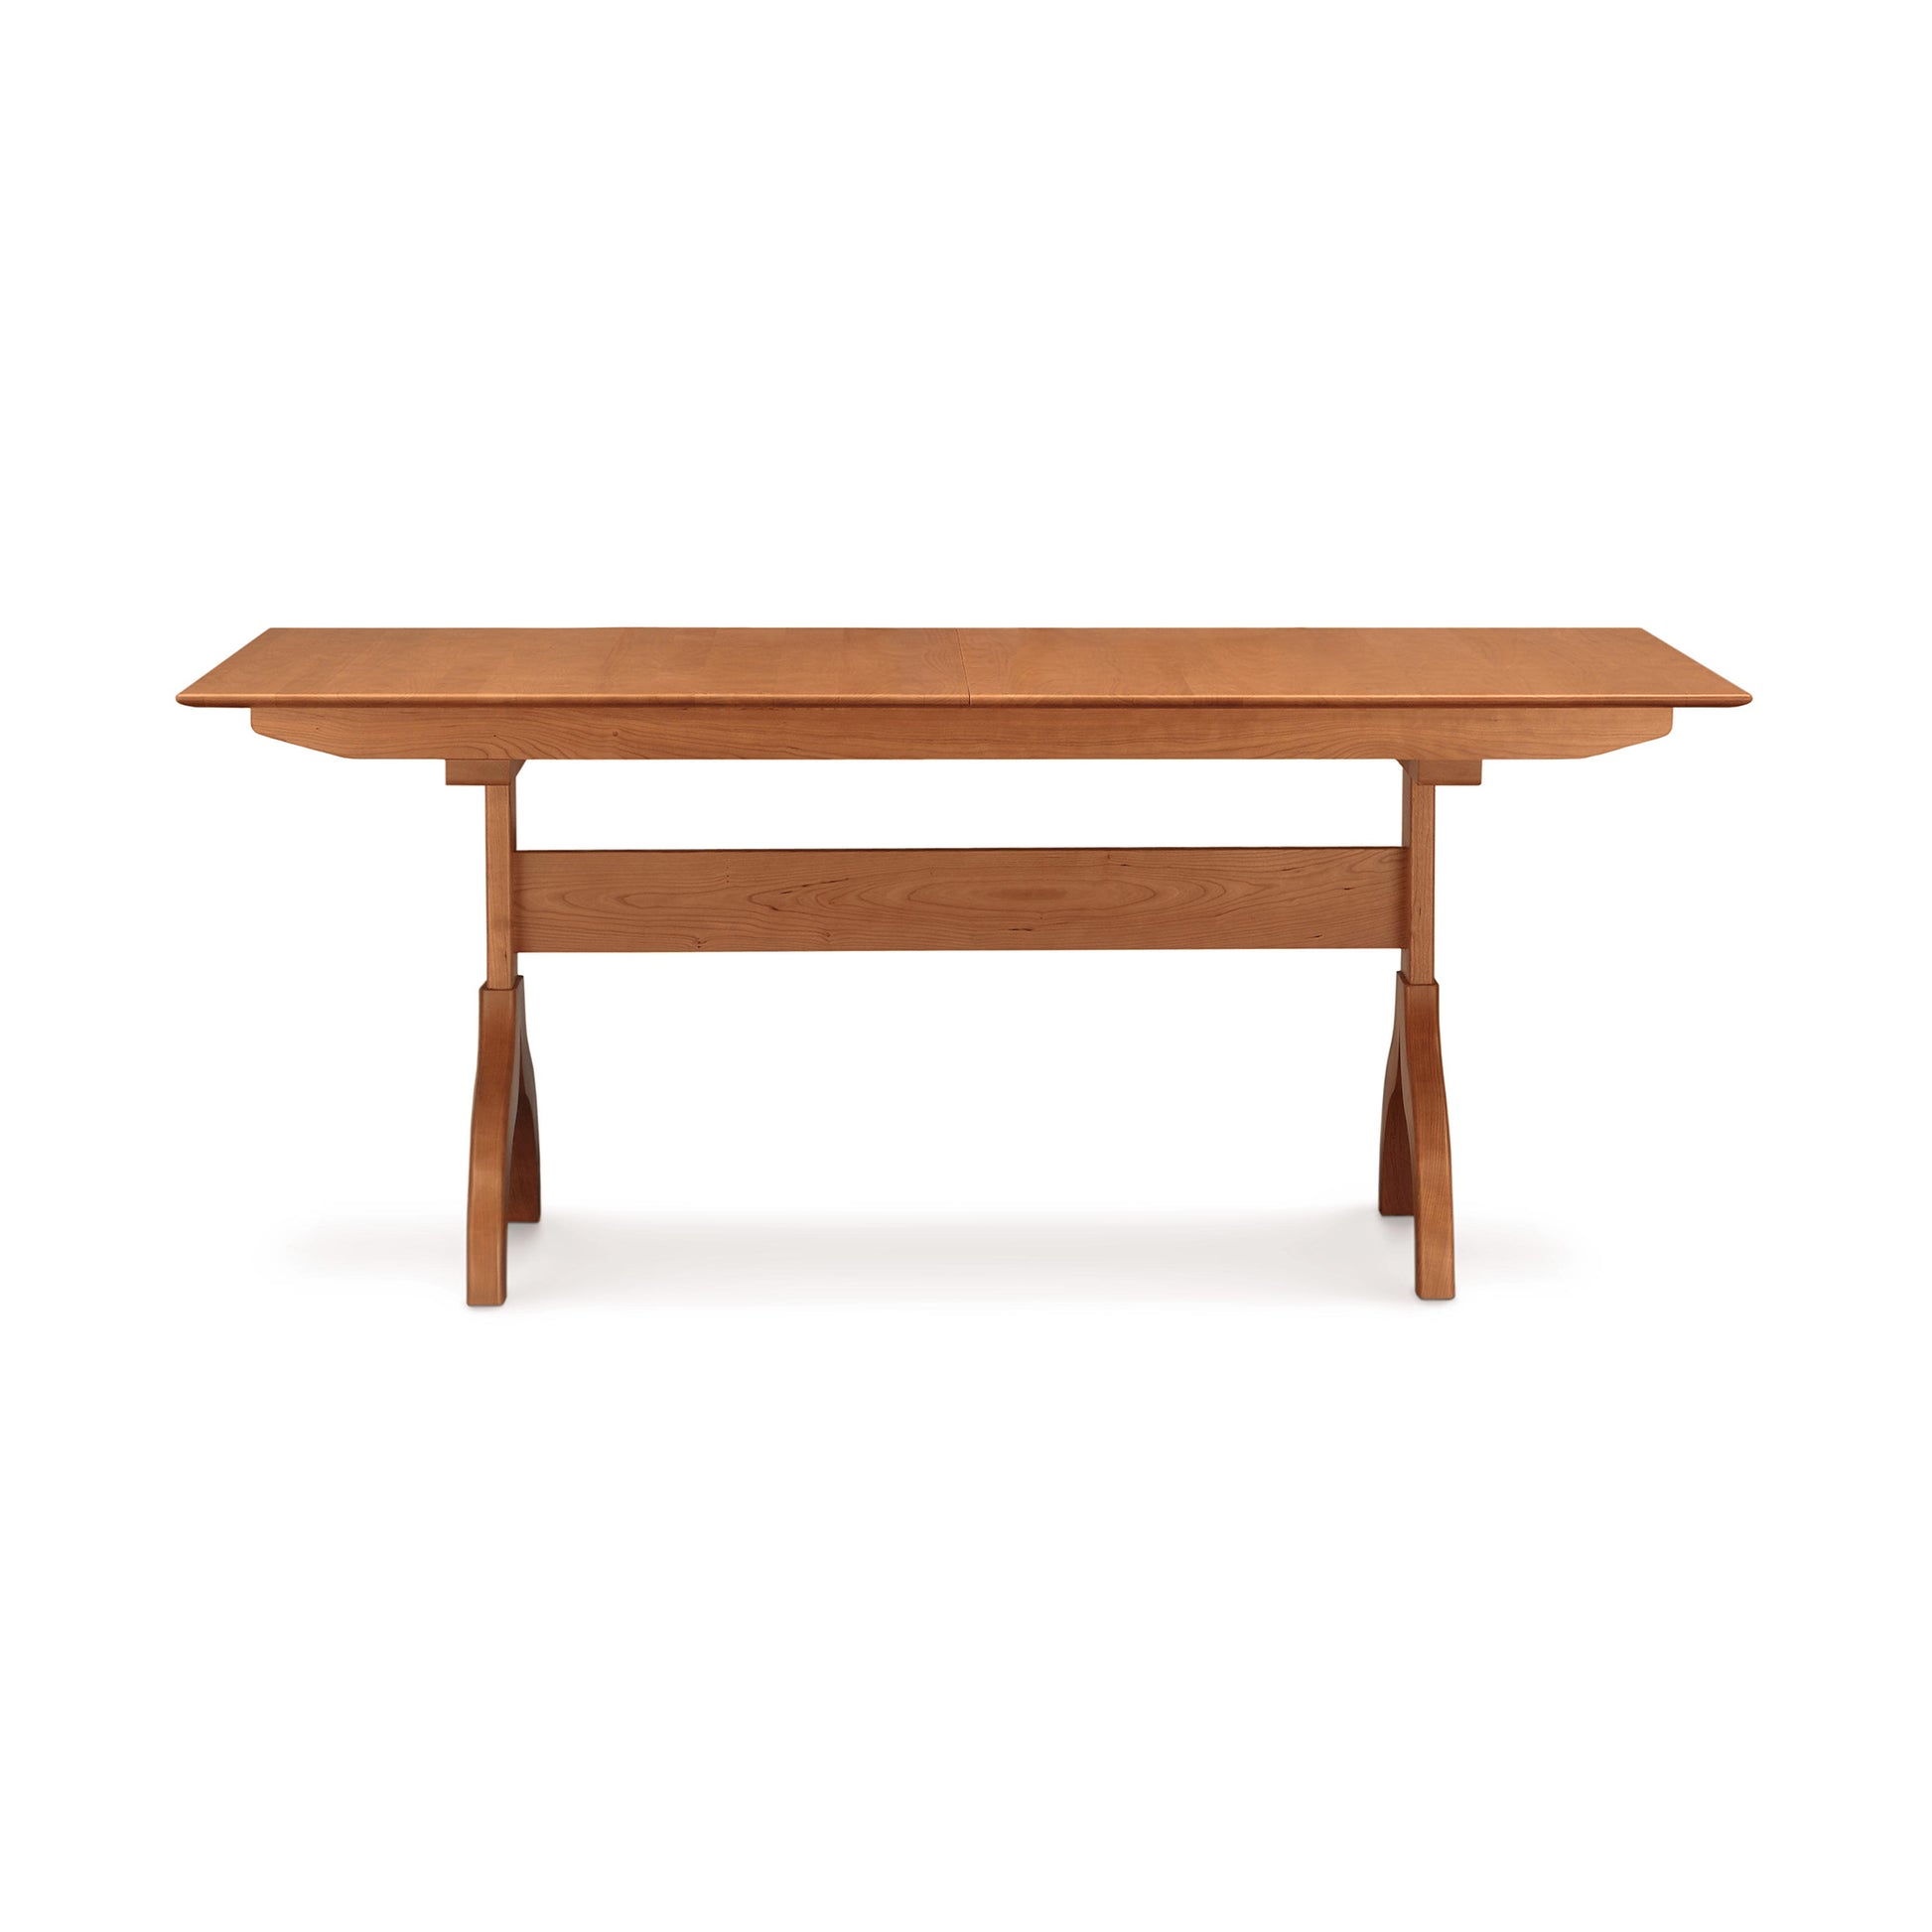 Copeland Furniture's Sarah Shaker Trestle Extension Table with drop-leaves on a white background.